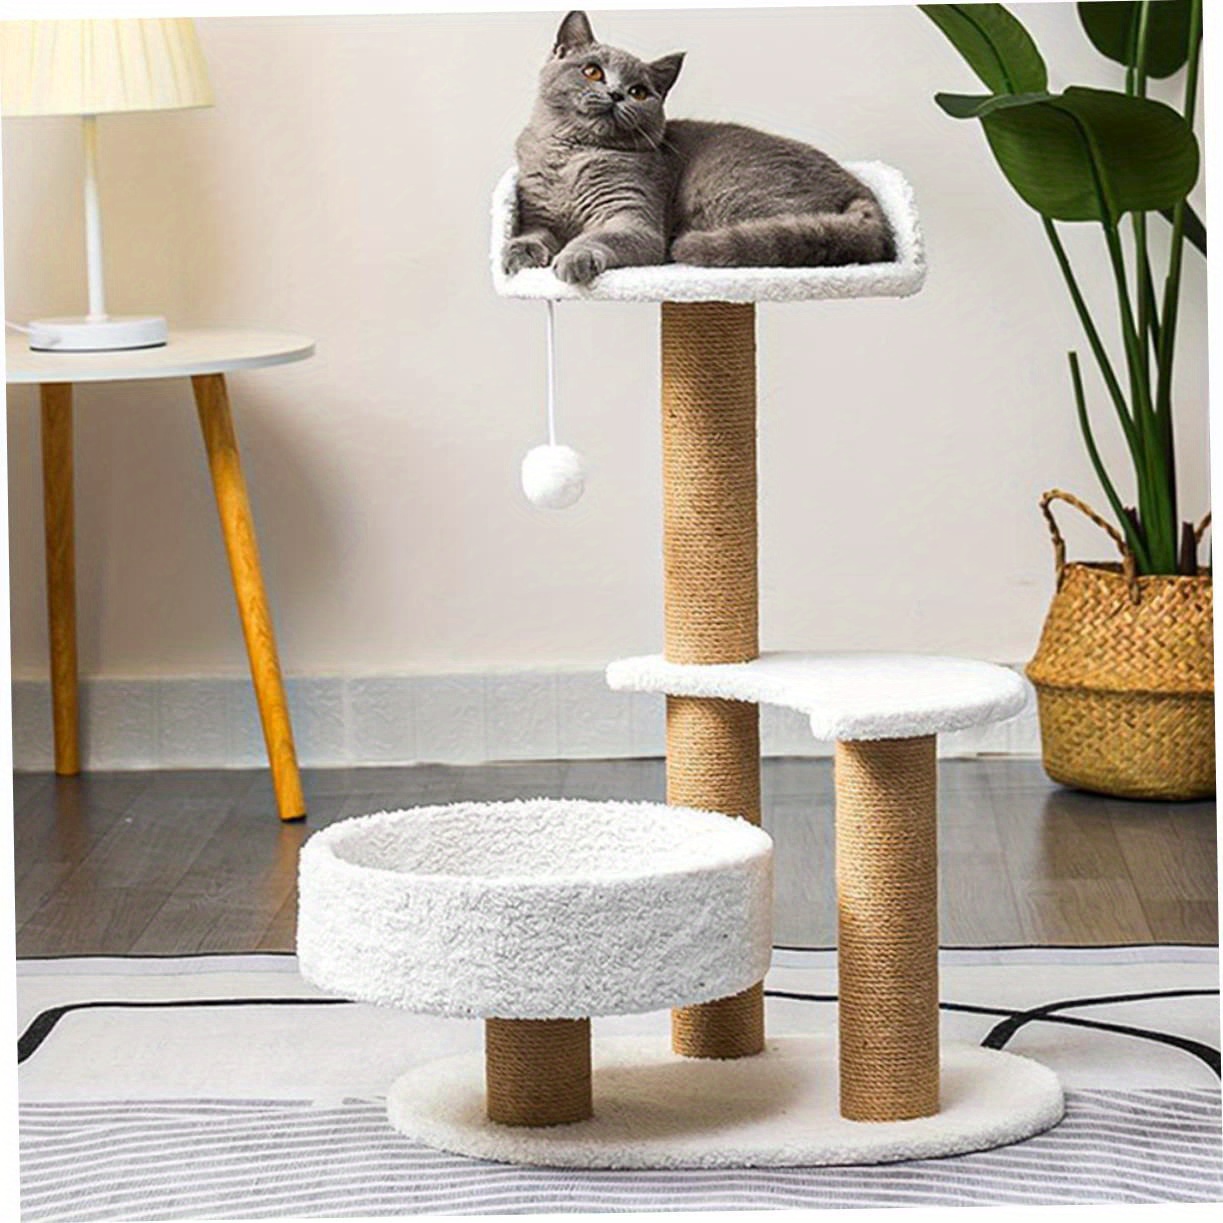 

Multi-level Cat Tree With Scratching Posts, Sisal Rope Scratcher With Replaceable Pillars, Interactive Cat Play Structure With Dangling Toy, Kitten Activity Tower - Suitable For Indoor Cats